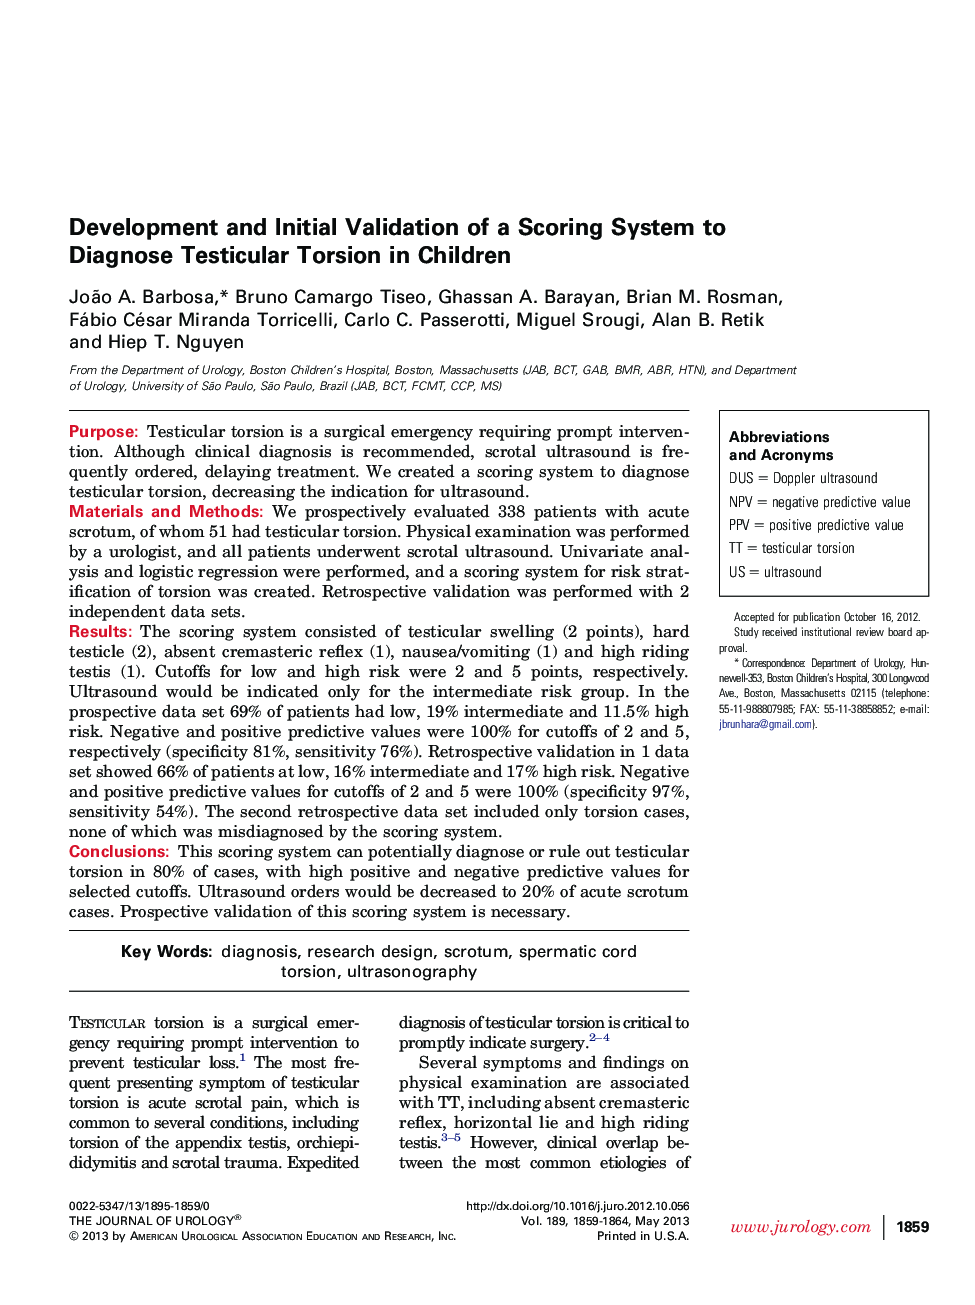 Development and Initial Validation of a Scoring System to Diagnose Testicular Torsion in Children 